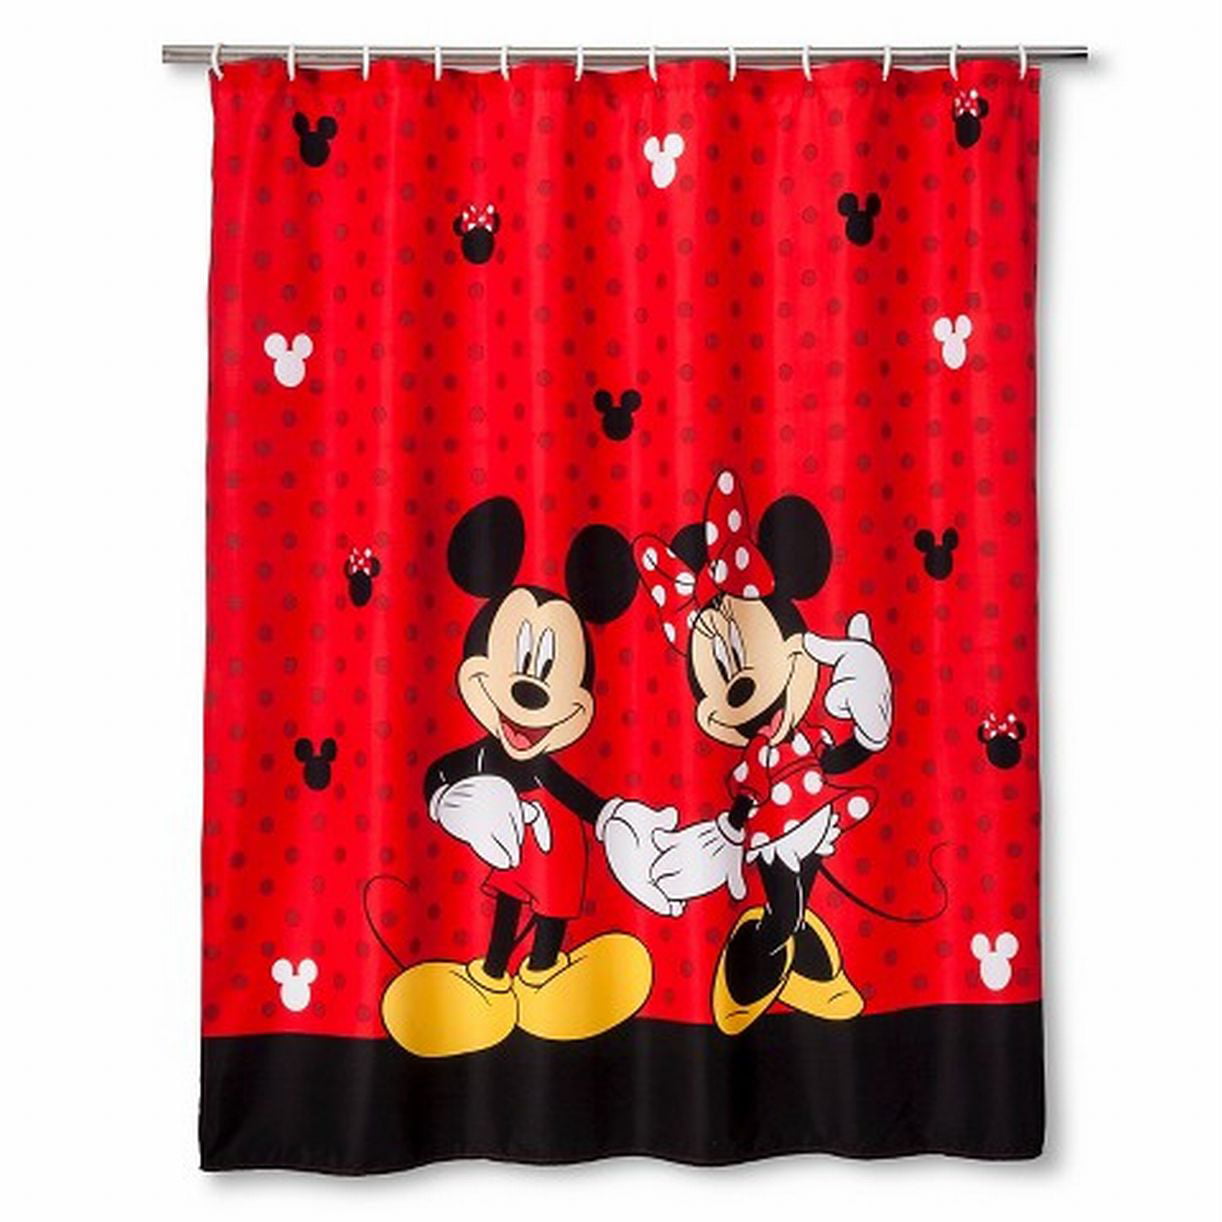 Disney Mickey Mouse & Minnie Mouse Fabric Shower Curtain